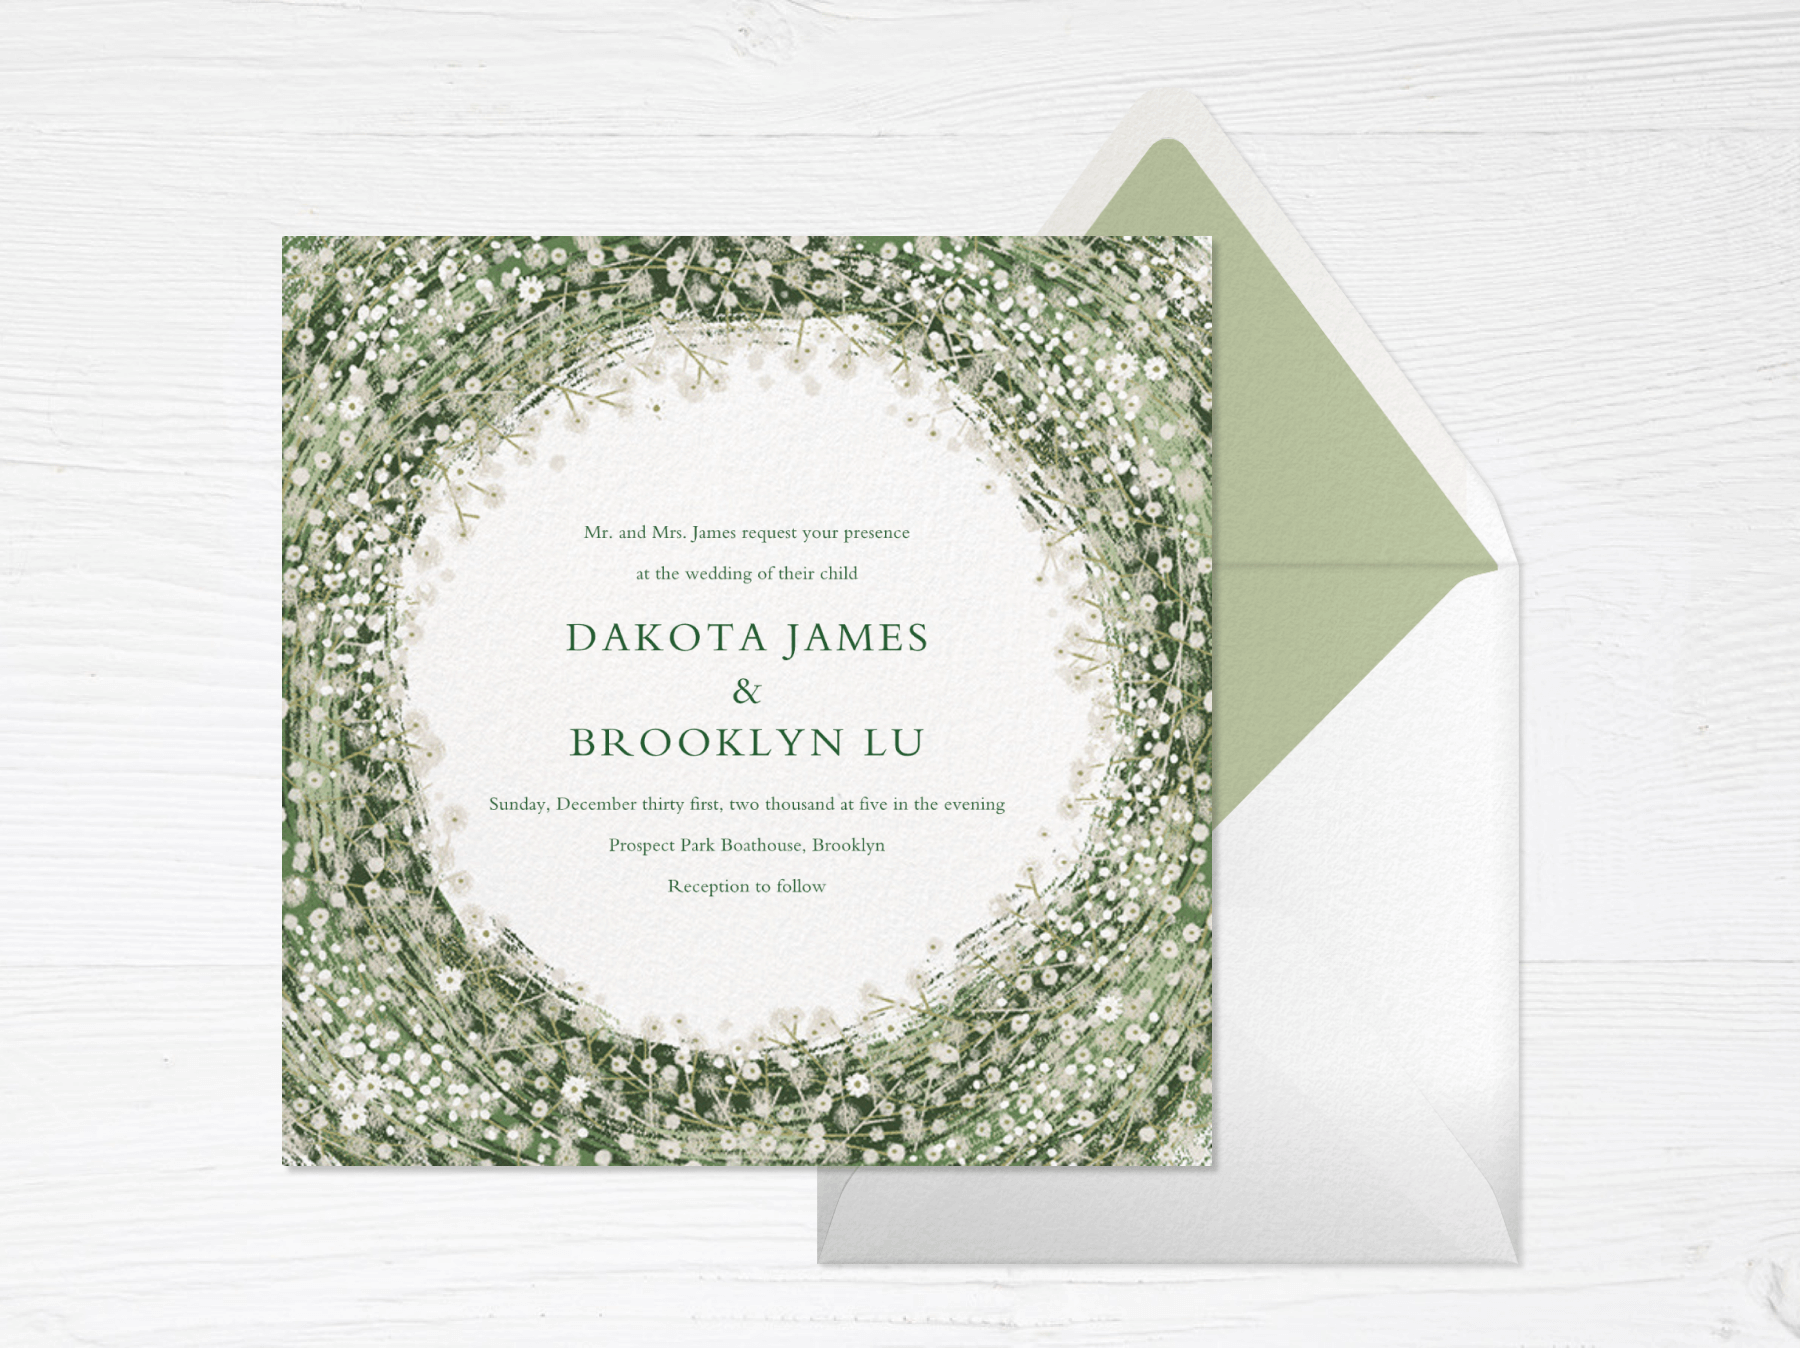 A square wedding invitation with various shades of green swirling around the center (forming a circle) dotted with plentiful tiny white daisies.